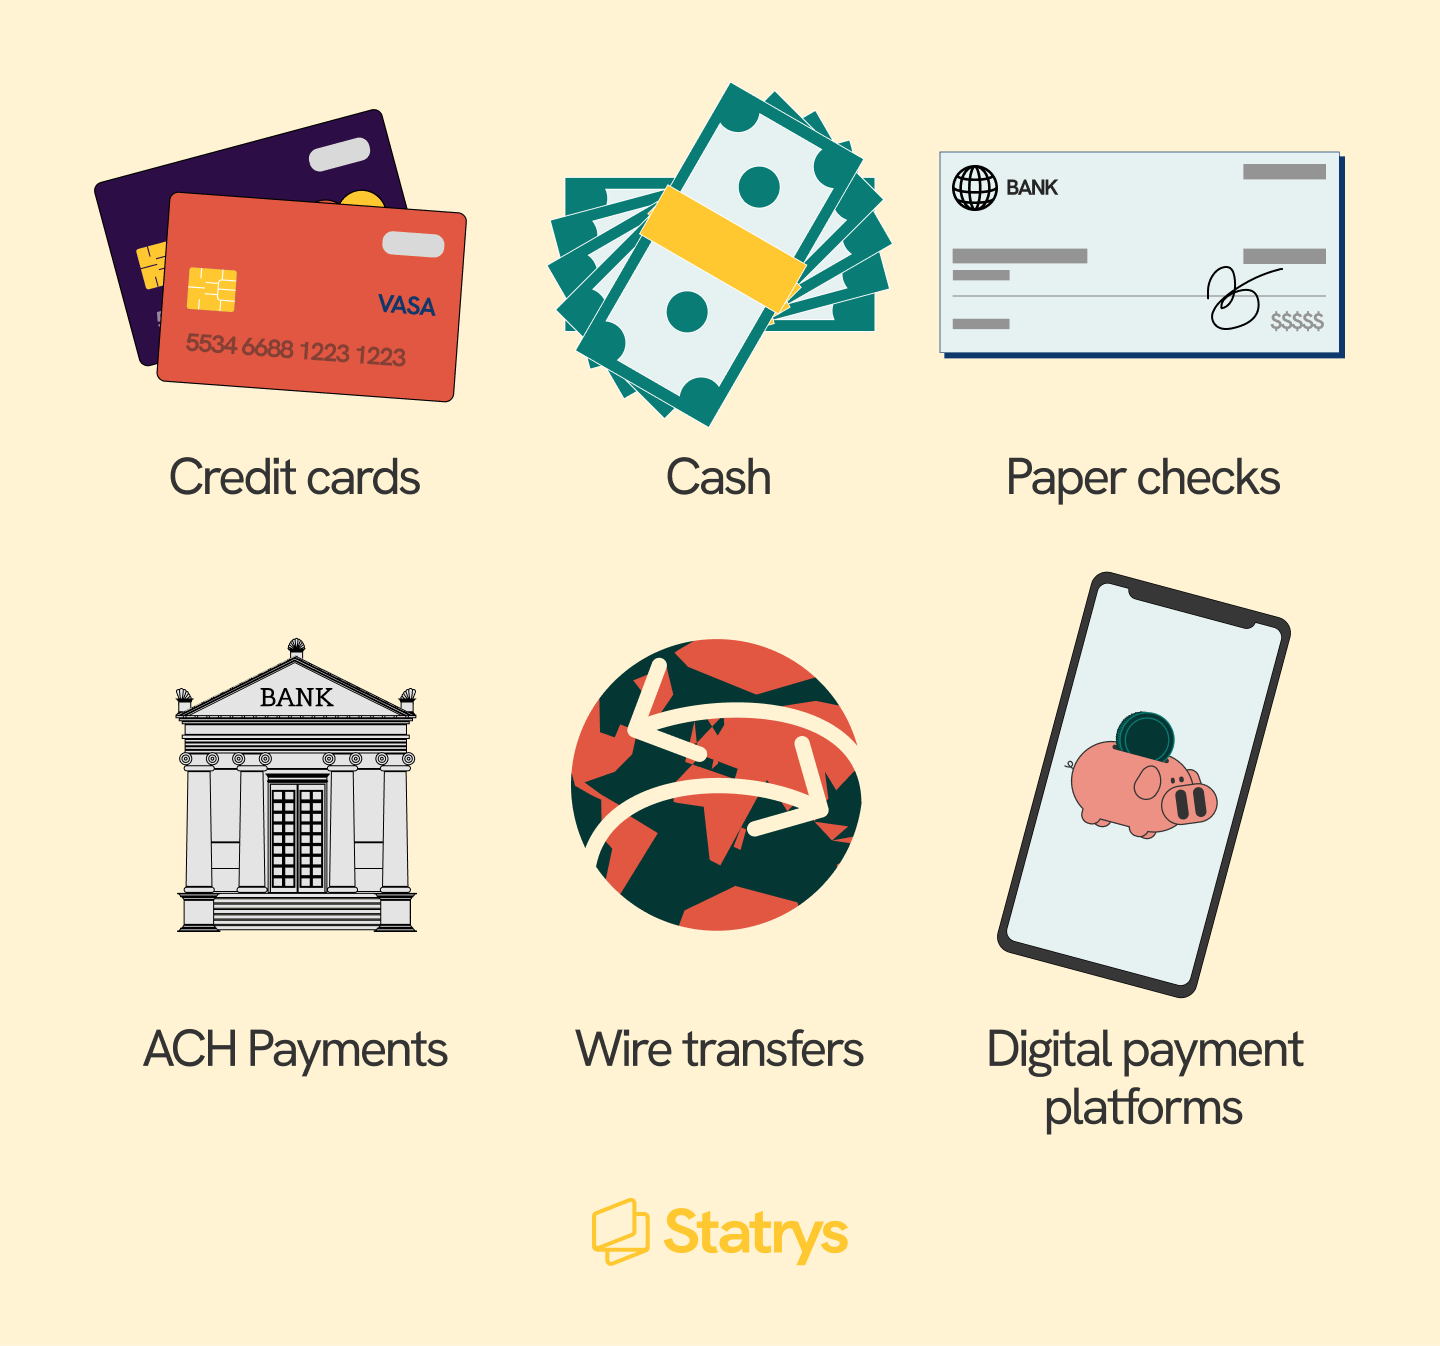 An infographic showing 6 types of B2B payments - credit cards, cash, paper checks, ACH payments, wire transfers, and digital payment platforms.